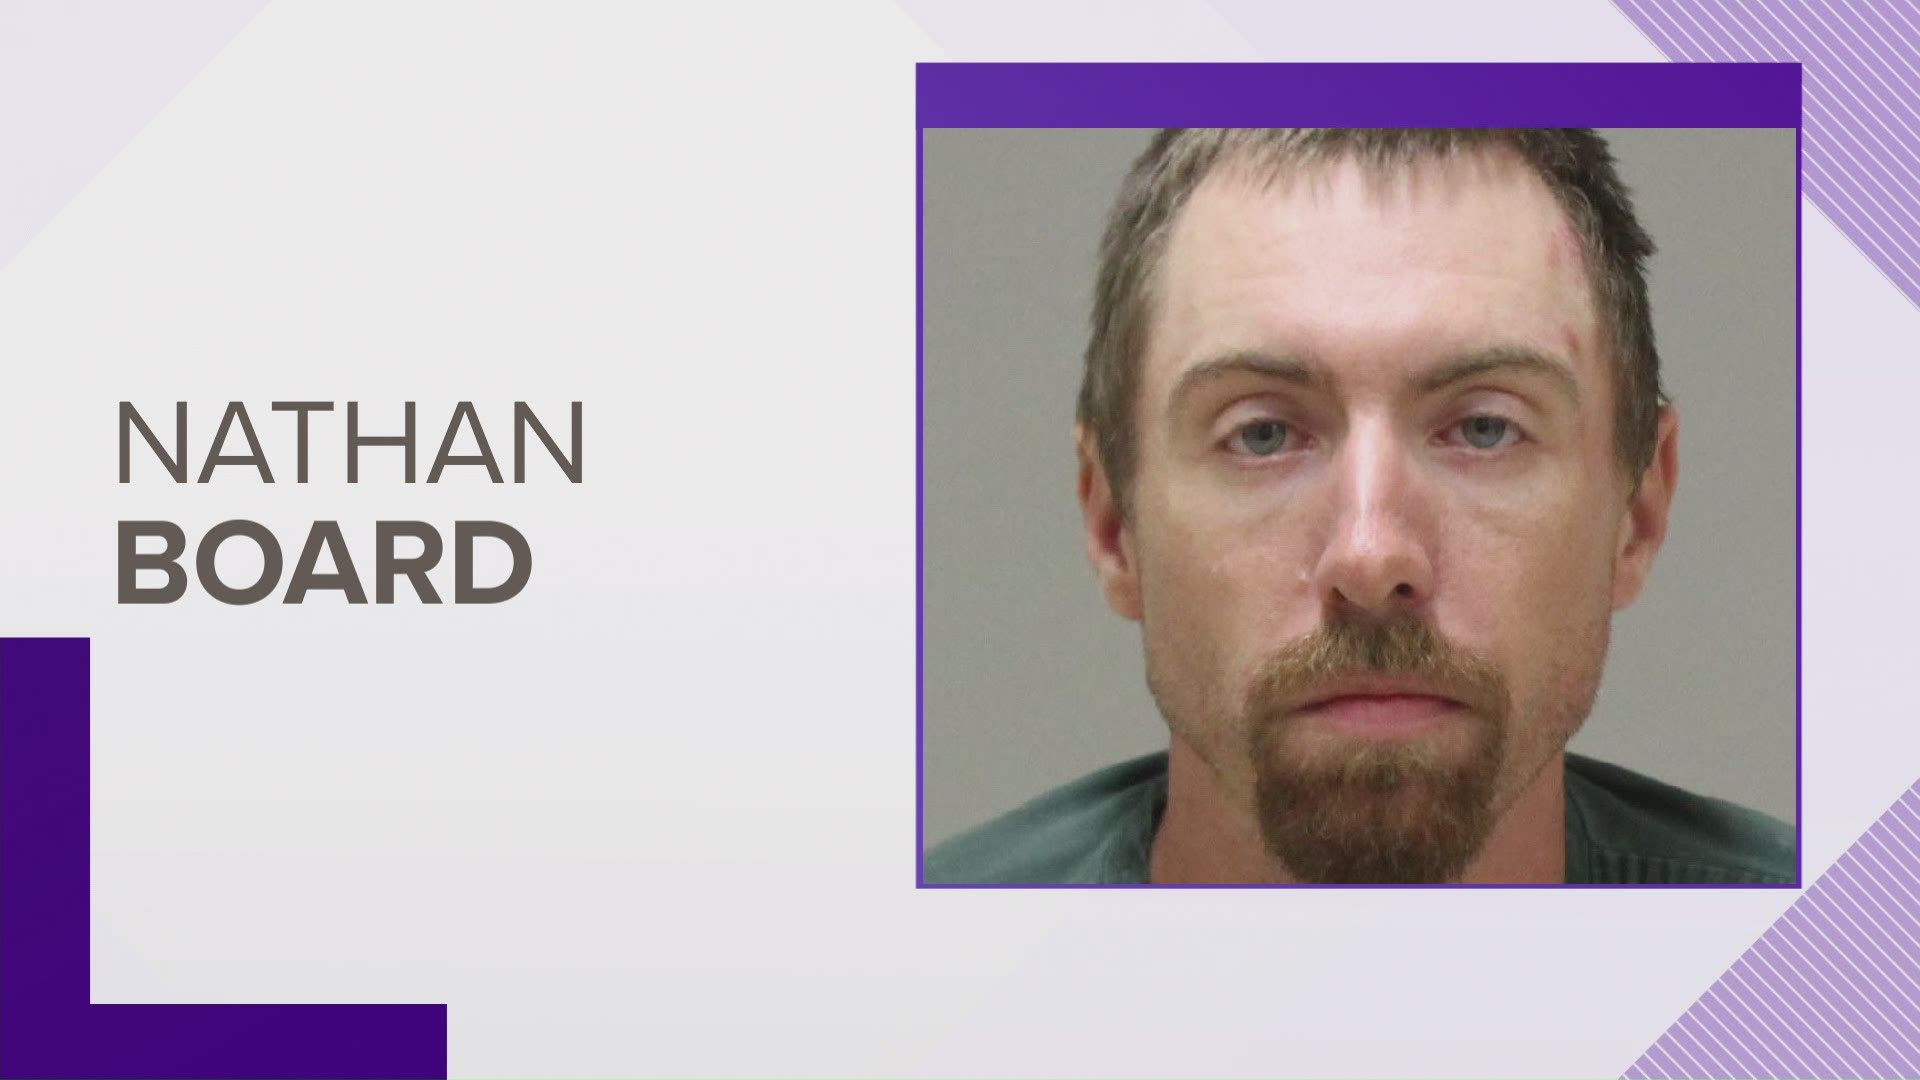 Nathan Board is charged with two counts of murder in the Sept. 2018 beating deaths of his in-laws; the non-jury trial is scheduled to begin Tuesday, Sept. 8.